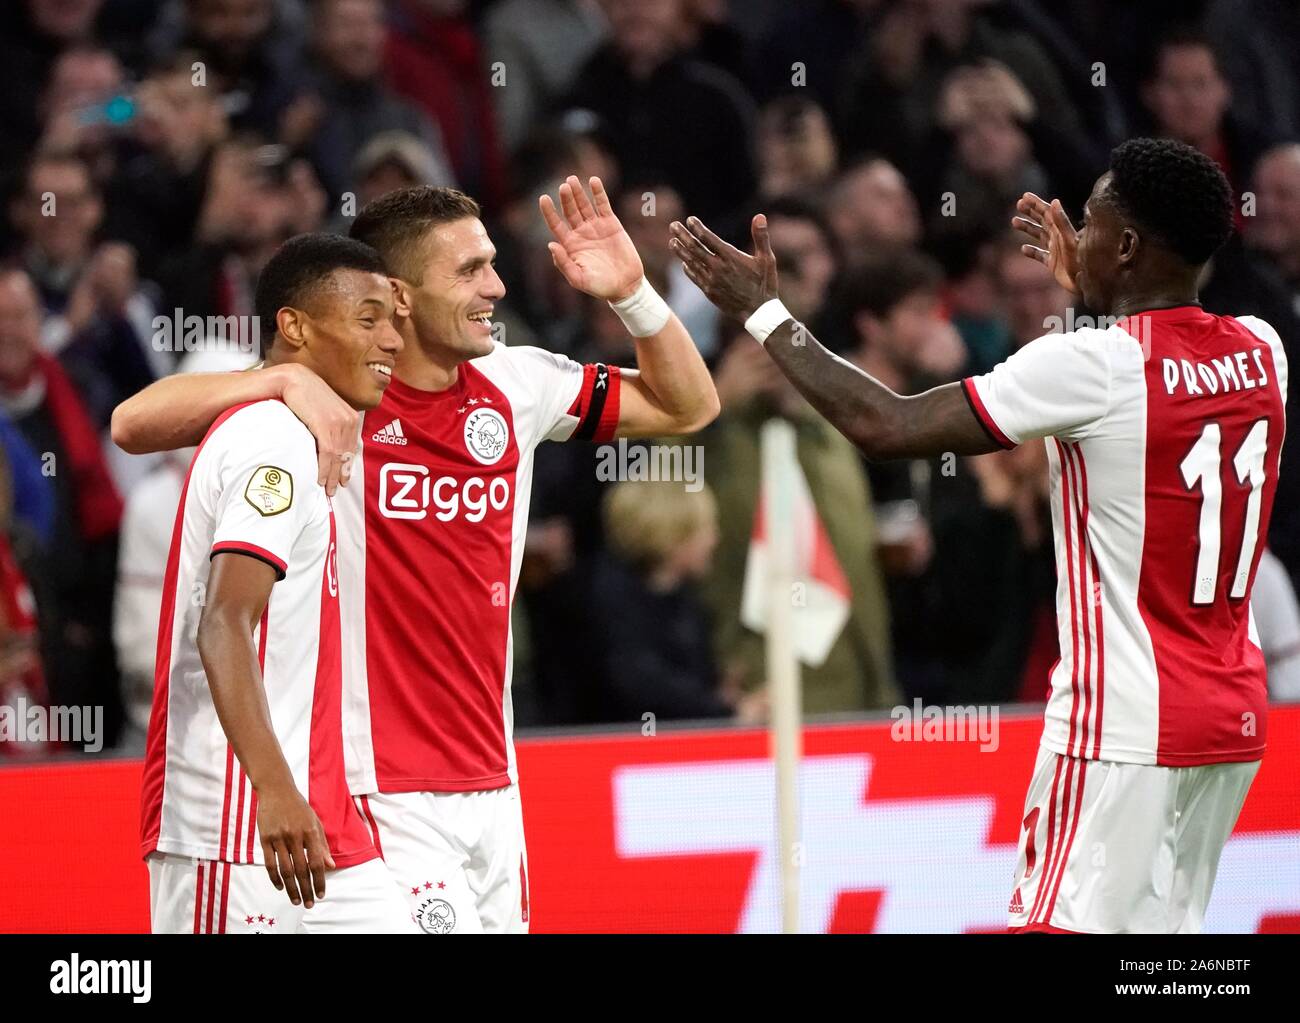 Amsterdam, Netherlands. 27th Oct, 2019. David Neres (Ajax) and Dusan Tadic (Ajax) after 3-0 during Premier Divison football Ajax-Feyenoord on October 27, 2019 in the Johan Cruijff Arena in Amsterdam (Photo: Soenar Chamid/SCS/AFLO) (HOLLAND OUT) Credit: Aflo Co. Ltd./Alamy Live News Stock Photo